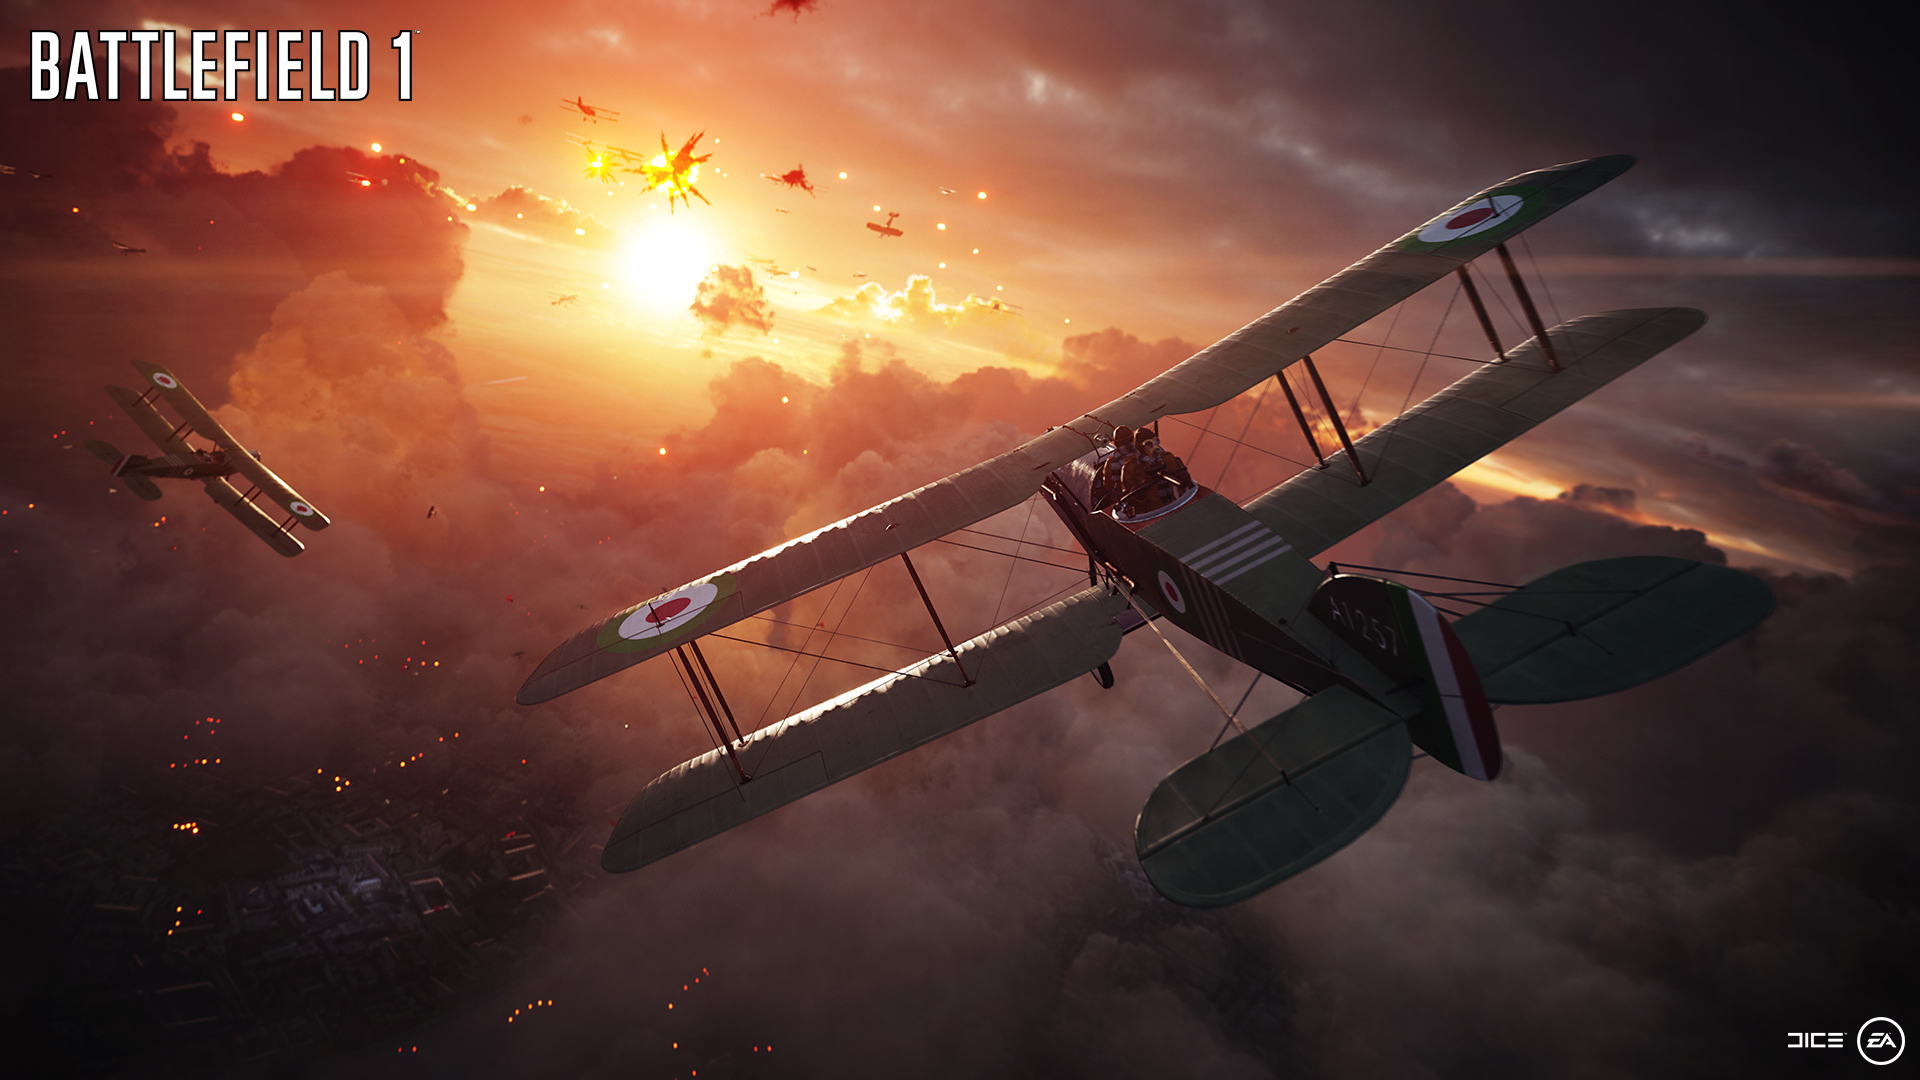 “Battlefield 1” Beta Now Open - Don't Forget Your Bayonet!